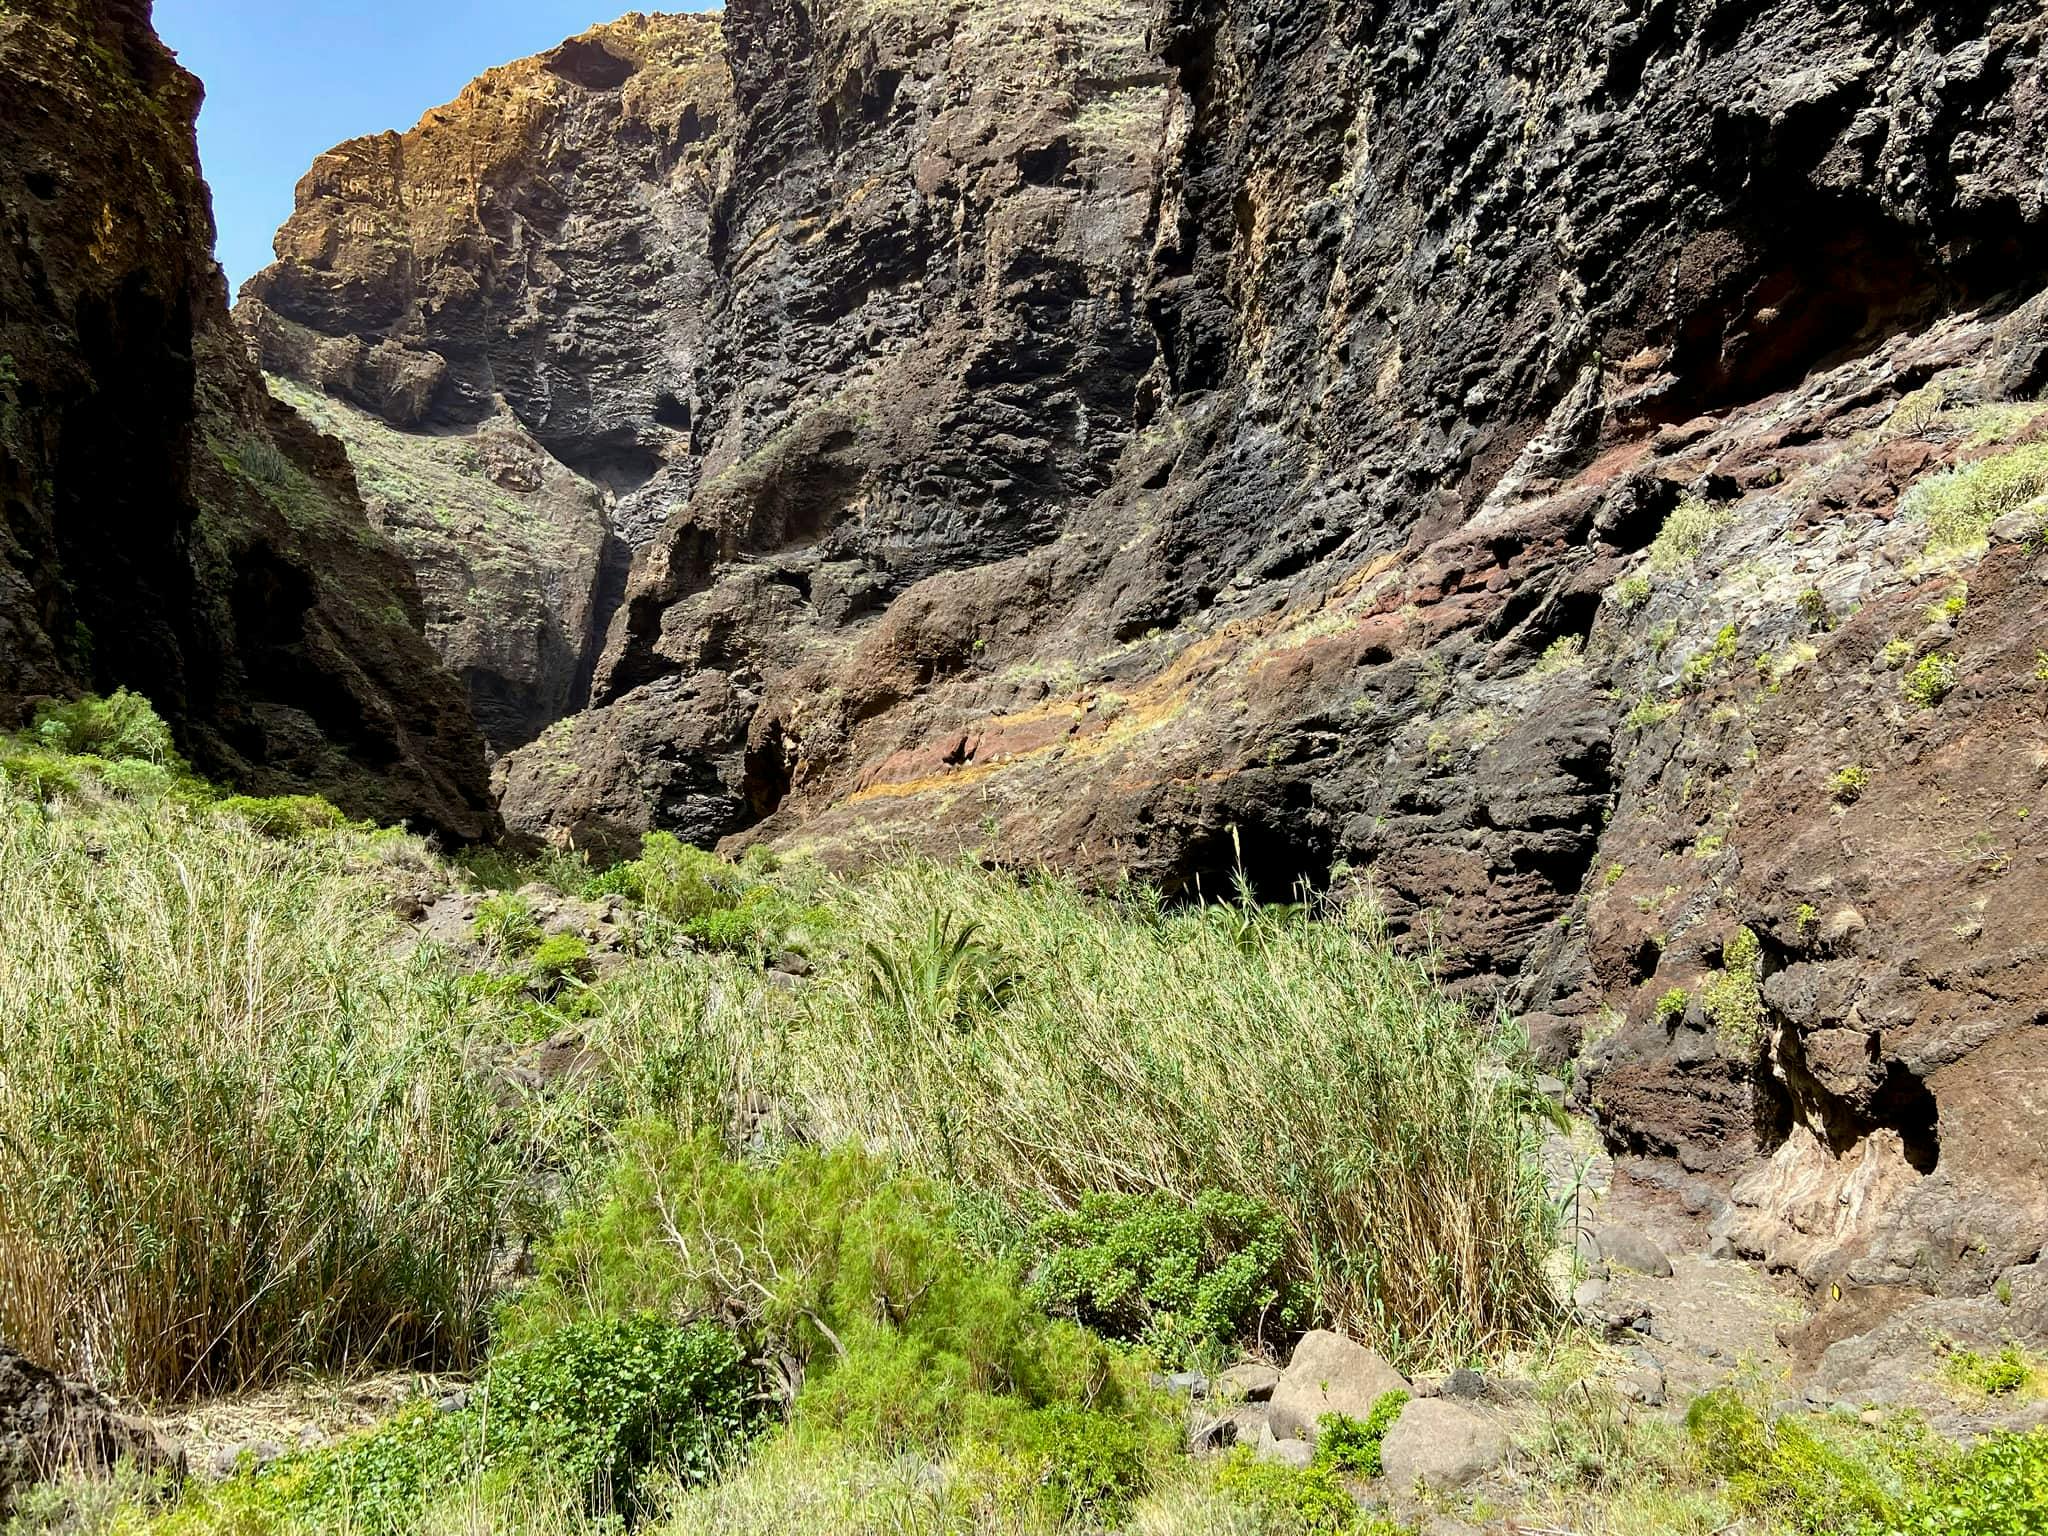 Reopening of the Barranco de Masca on 27 March 2021